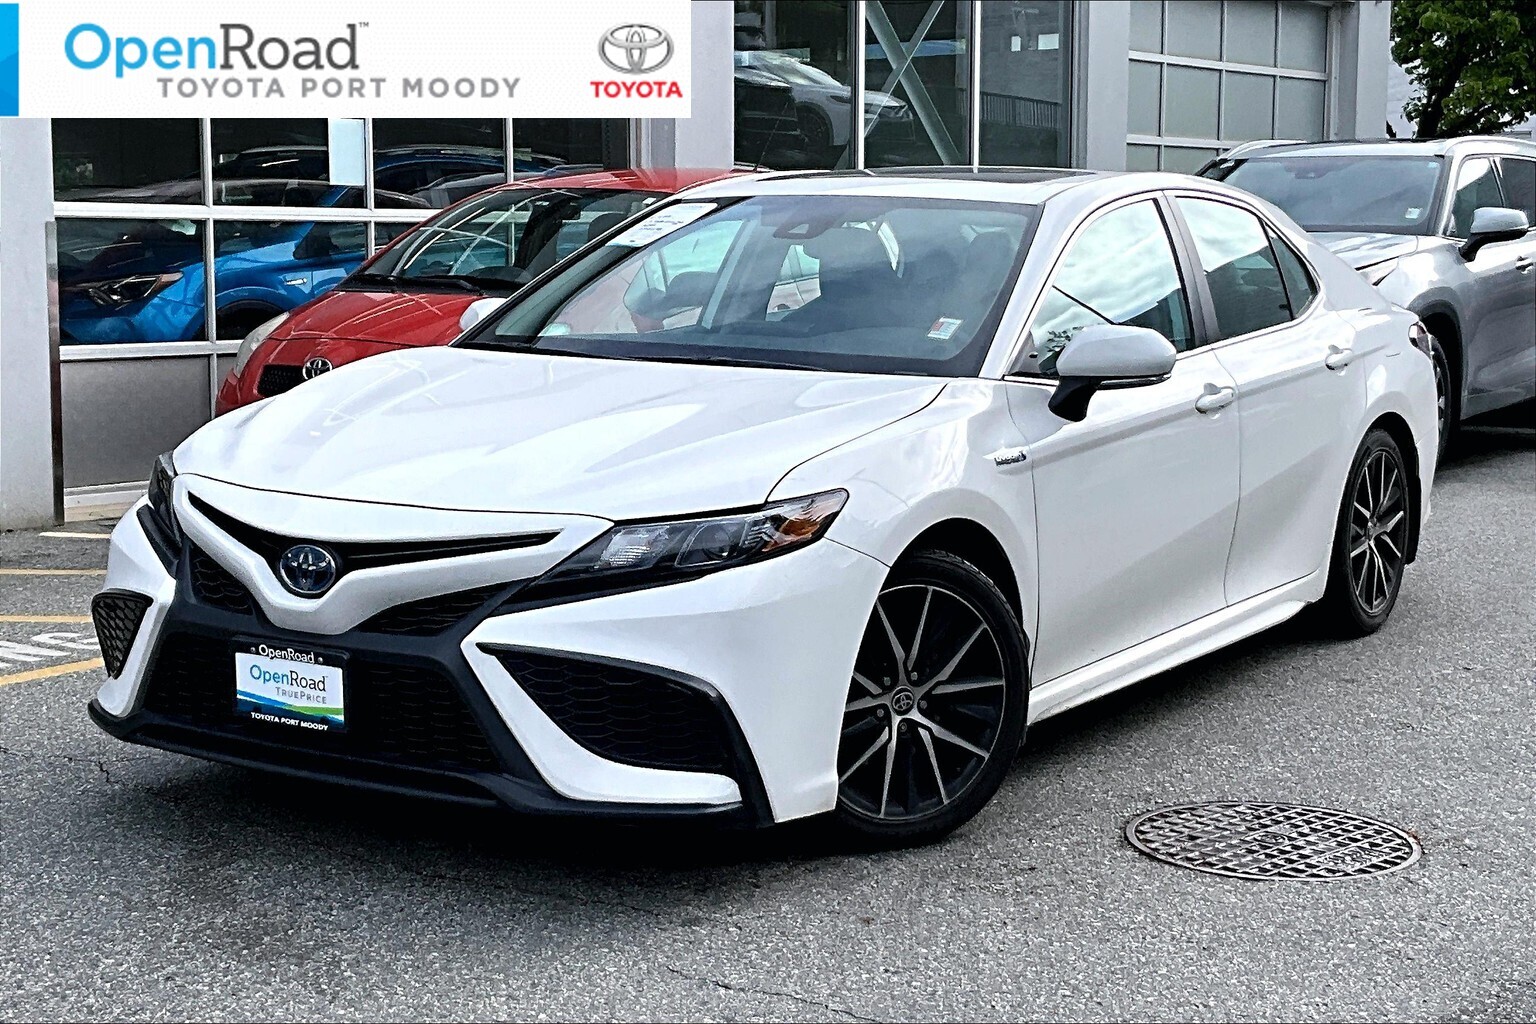 2021 Toyota Camry Hybrid SE |OpenRoad True Price |Local |One Owner |Full Se